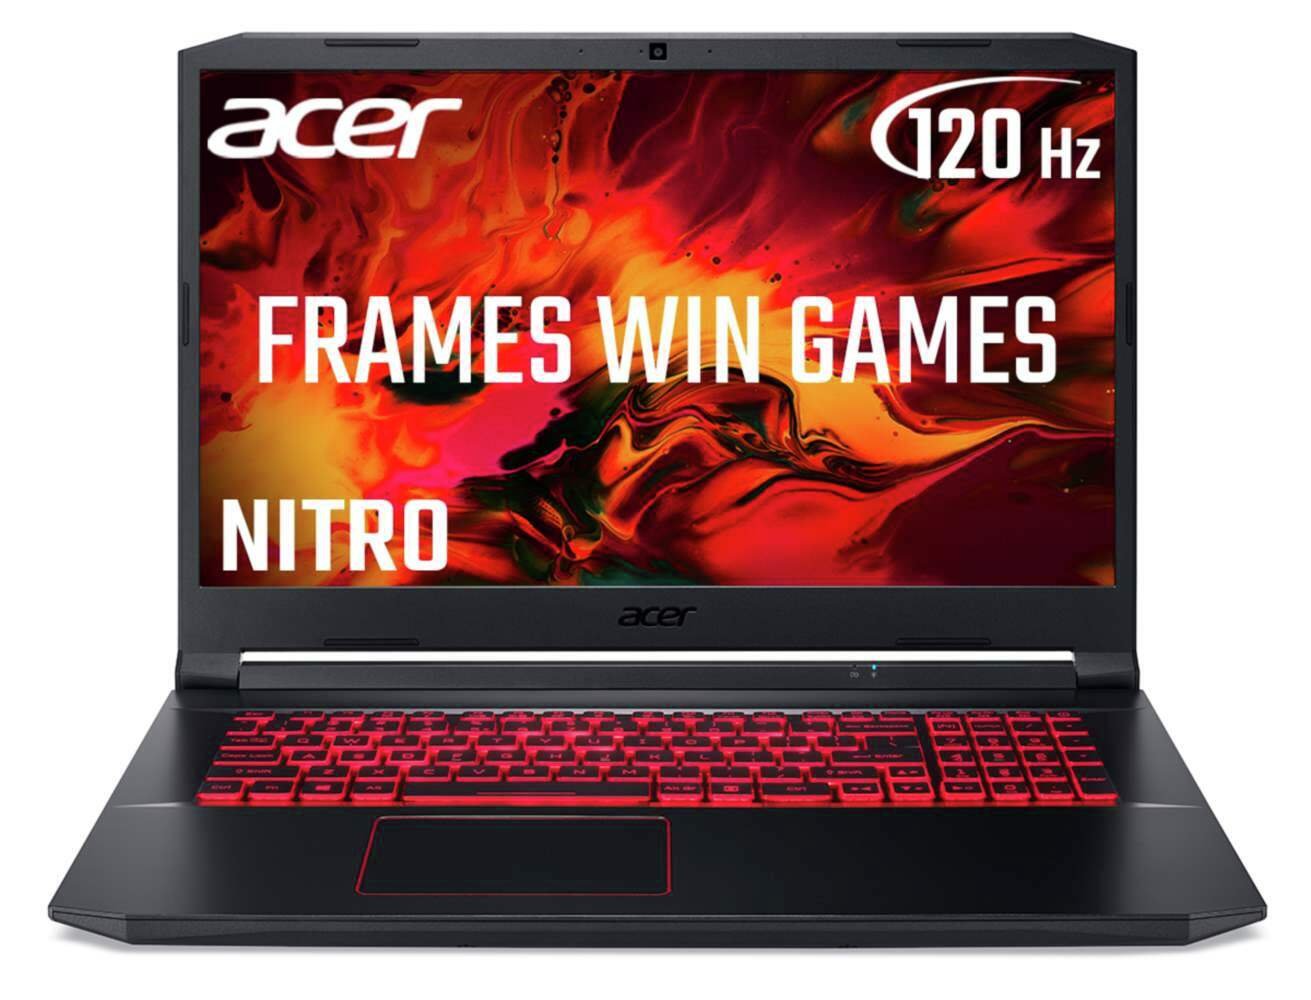 Acer Nitro 5 17.3in i5 8GB 512GB GTX1650 Gaming Laptop Review